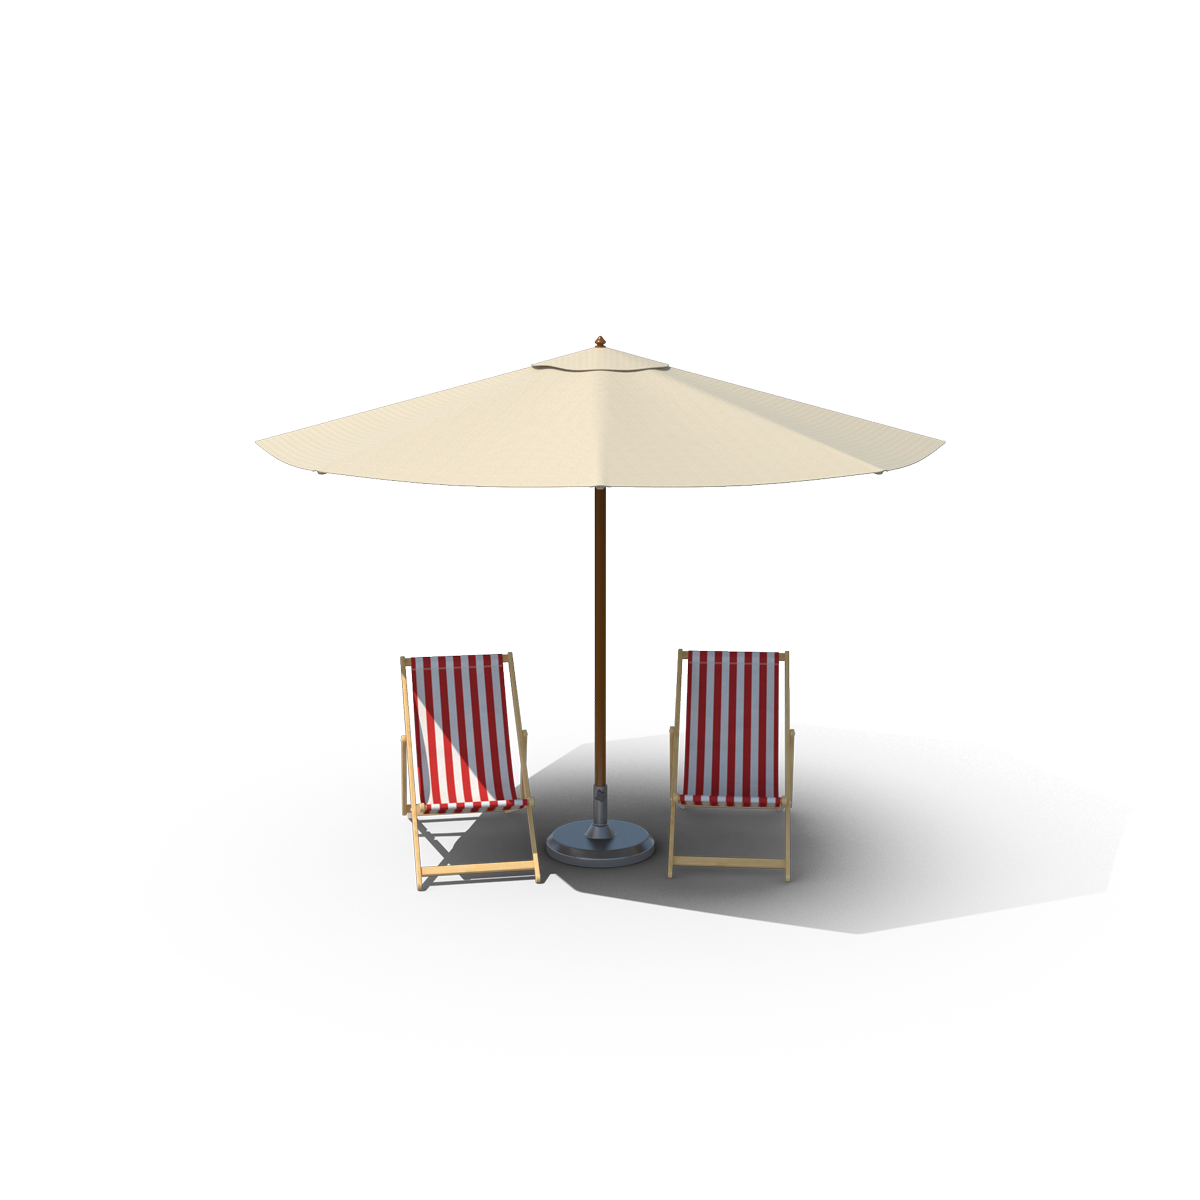 DECK CHAIRS WITH UMBRELLA